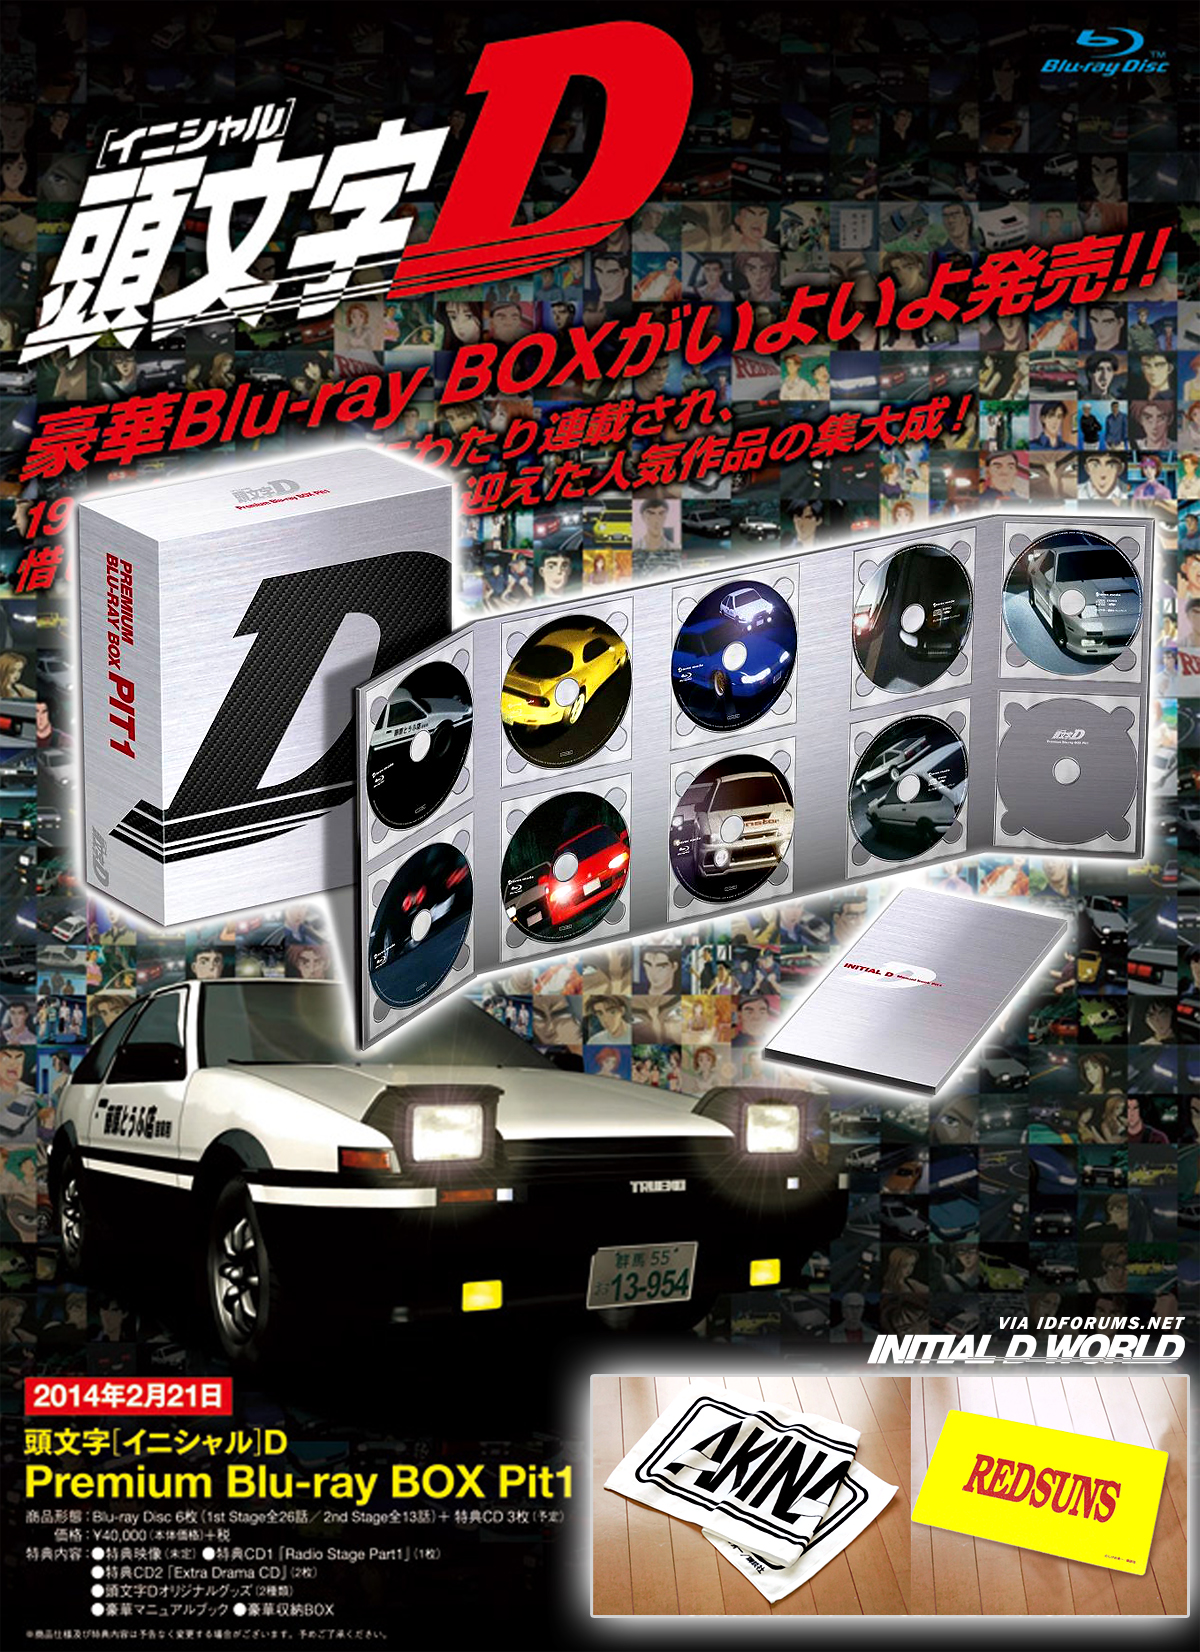 Initial D World - Discussion Board / Forums -> More info on